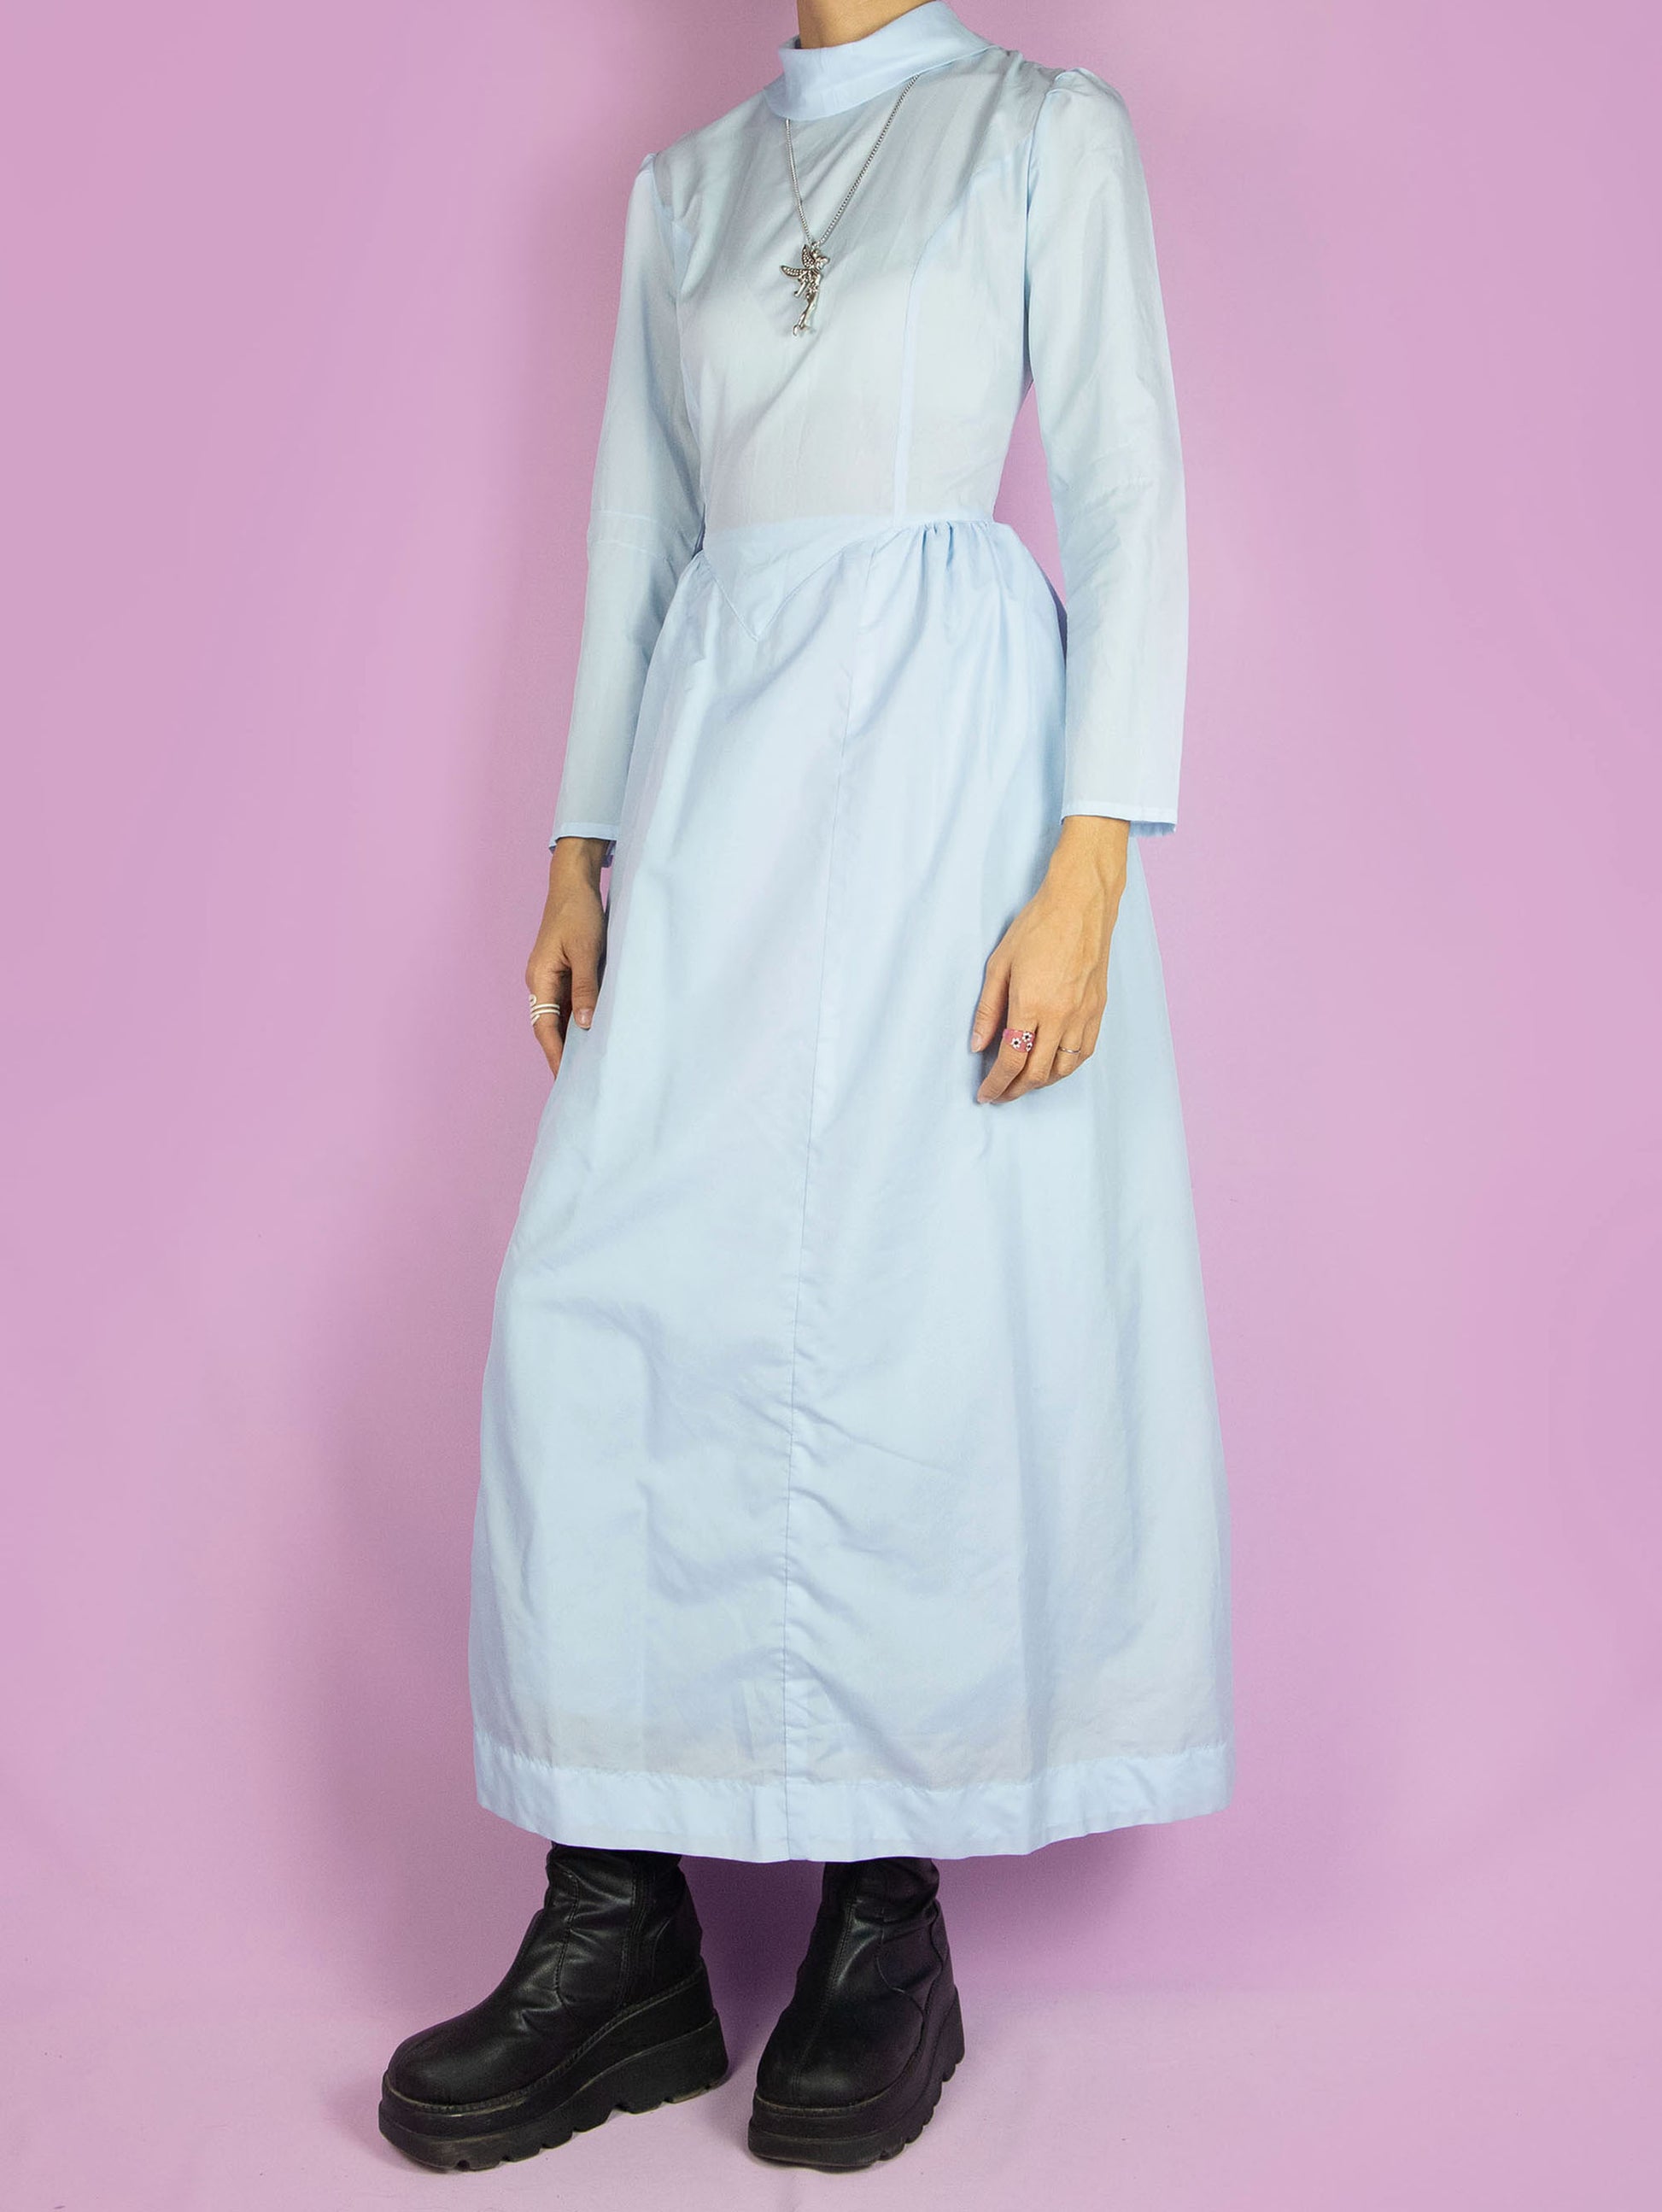 The Vintage 70s Cottage Prairie Maxi Dress is a light pastel blue long-sleeved dress with a collar and a zipper closure at the back. Country western inspired 1970s midi dress.